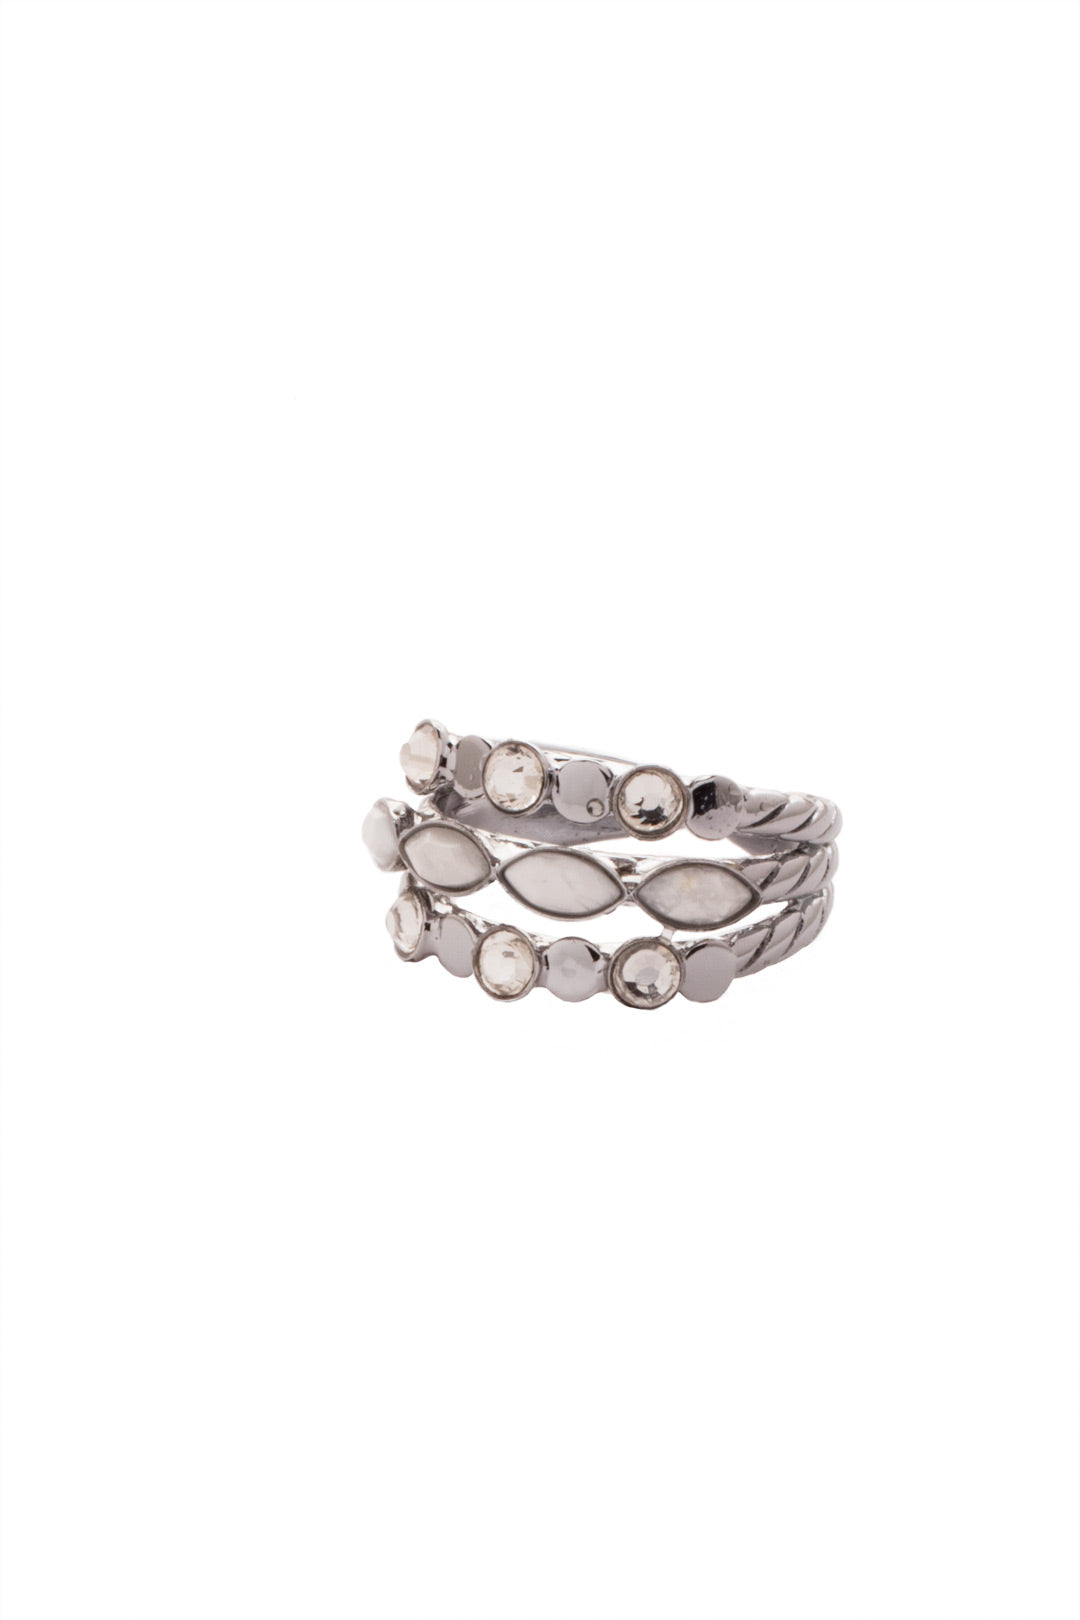 Somer Stacked Ring - REV7PDCRY - <p>Go bold with the Somer Stacked Ring. Three layers in one notice-me piece, it features metalwork and navette and round sparkling crystals. From Sorrelli's Crystal collection in our Palladium finish.</p>